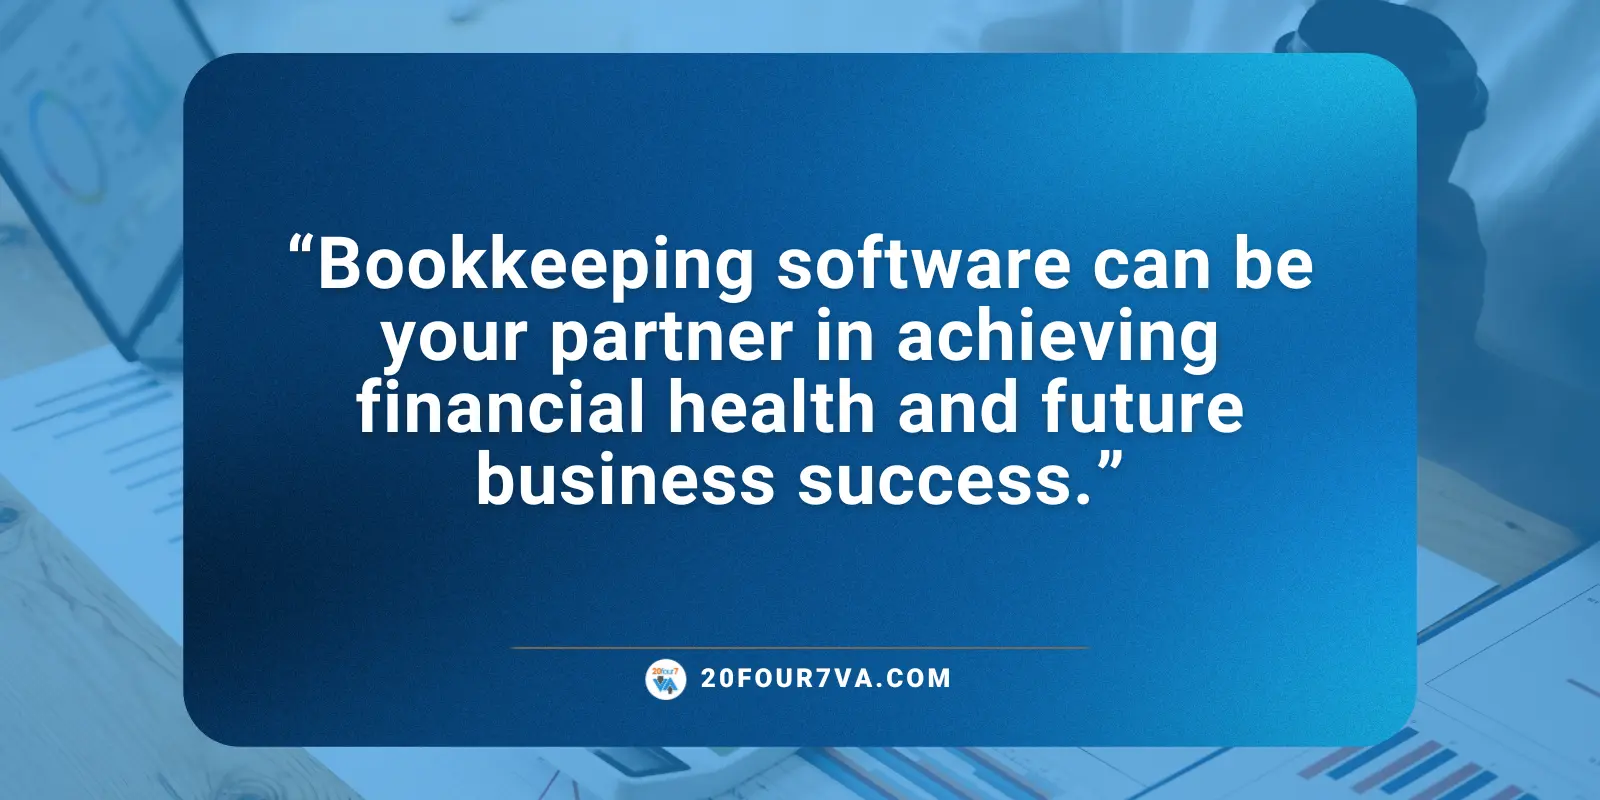 Bookkeeping software can be your partner in business